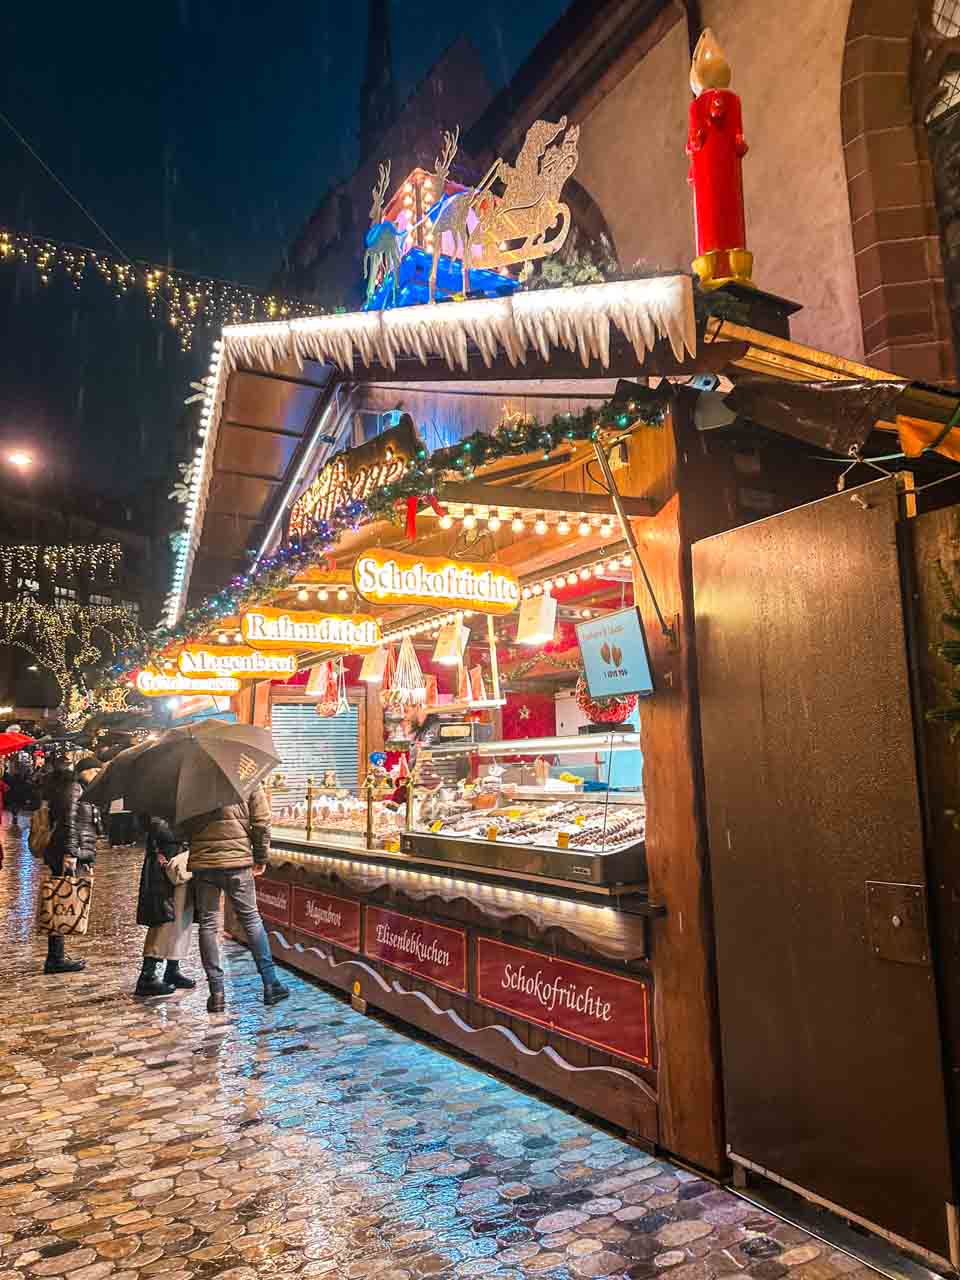 A cosy Christmas market stall at night offering an array of chocolate-covered fruits, with shoppers browsing under a light drizzle